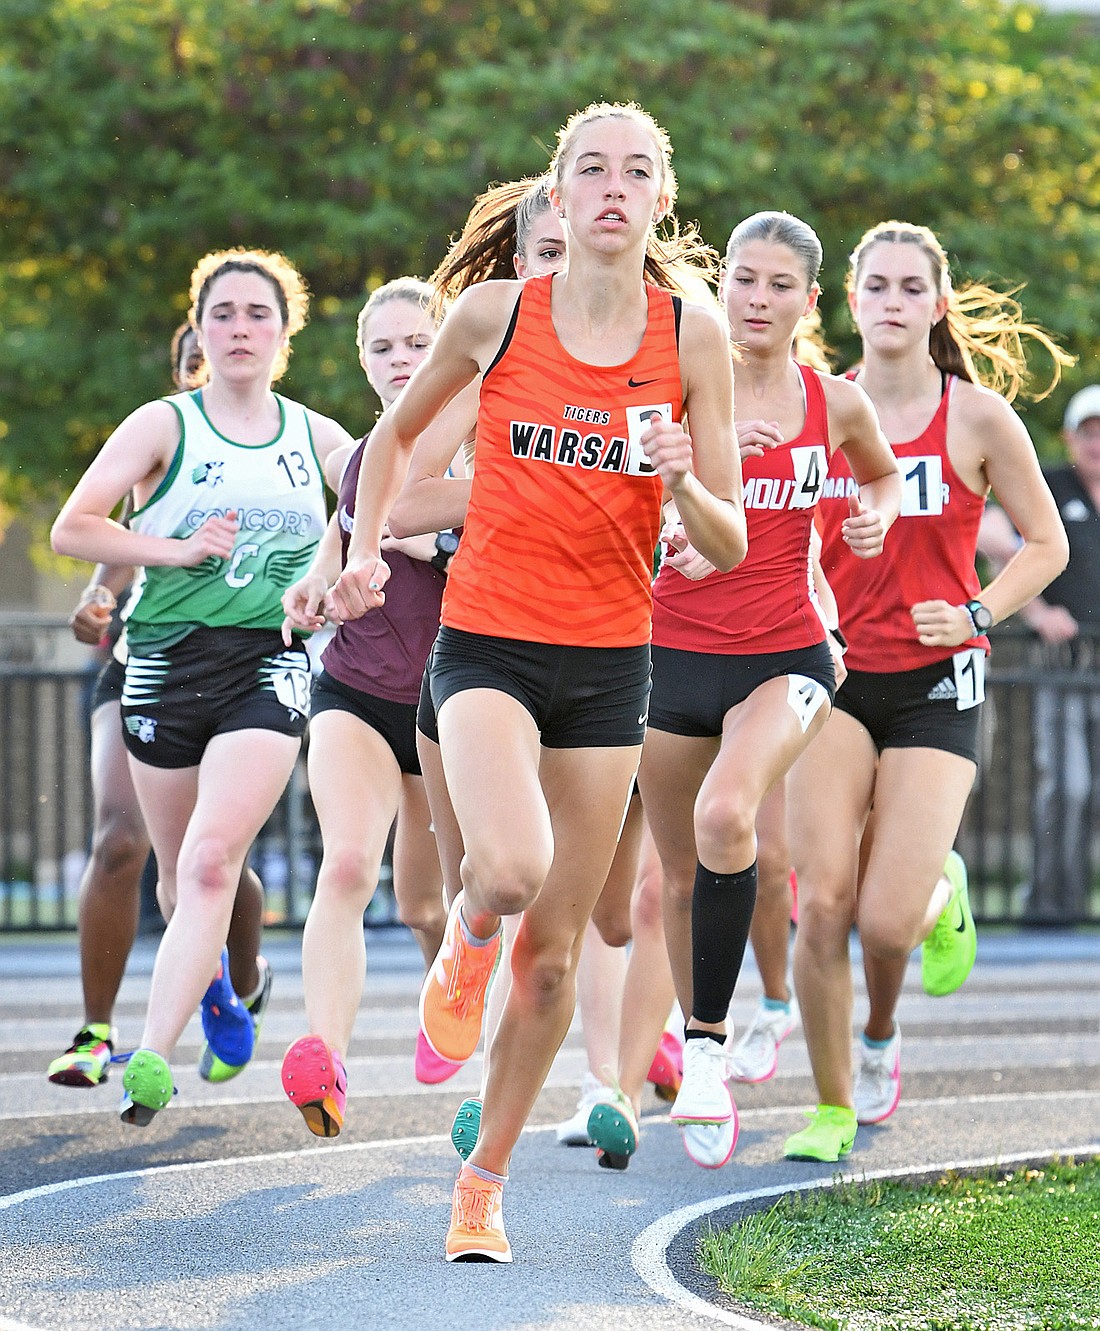 En route to winning the 1600 meter race, Warsaw senior Josefina Rastrelli leads all runners into the first turn...Nieter